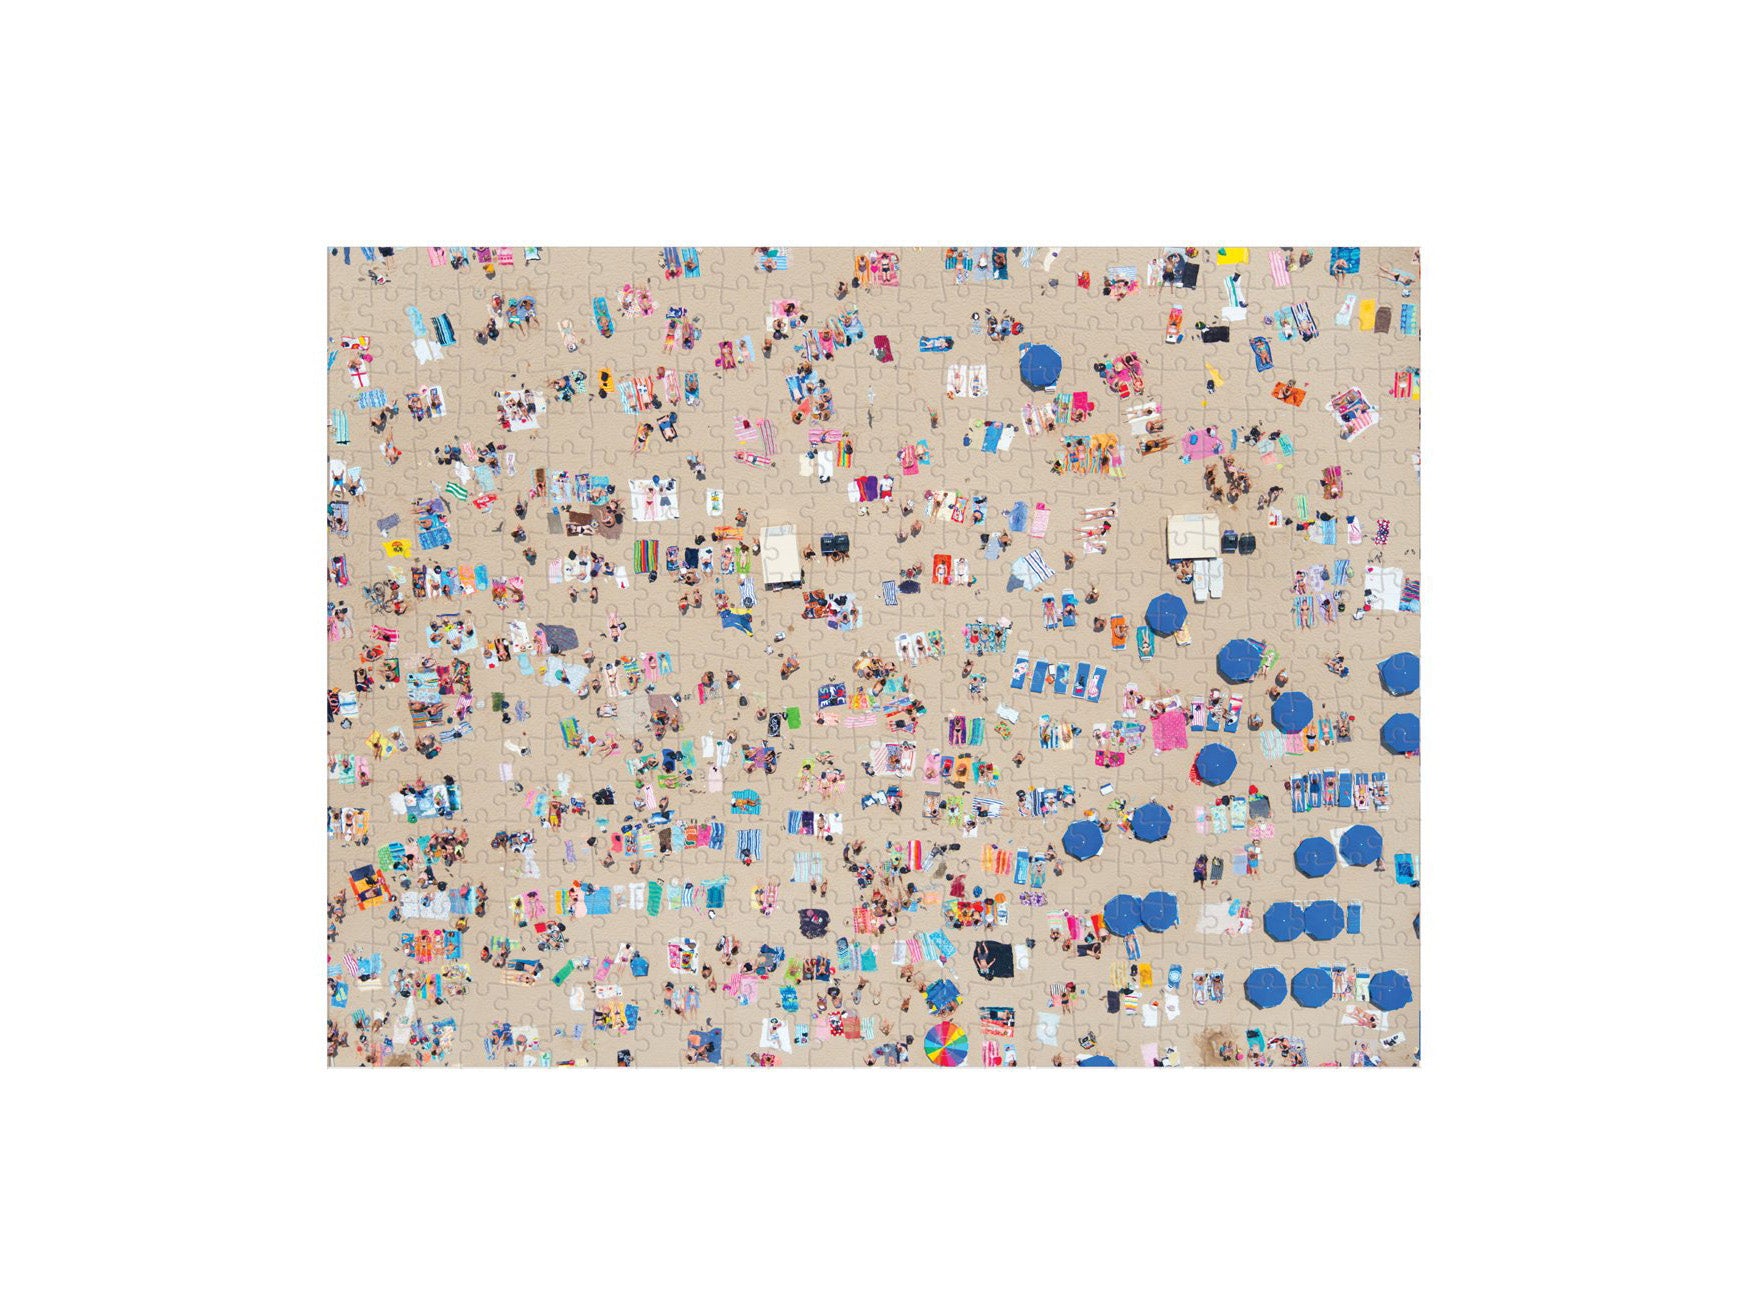 Gray Malin The Beach Two-sided Puzzle